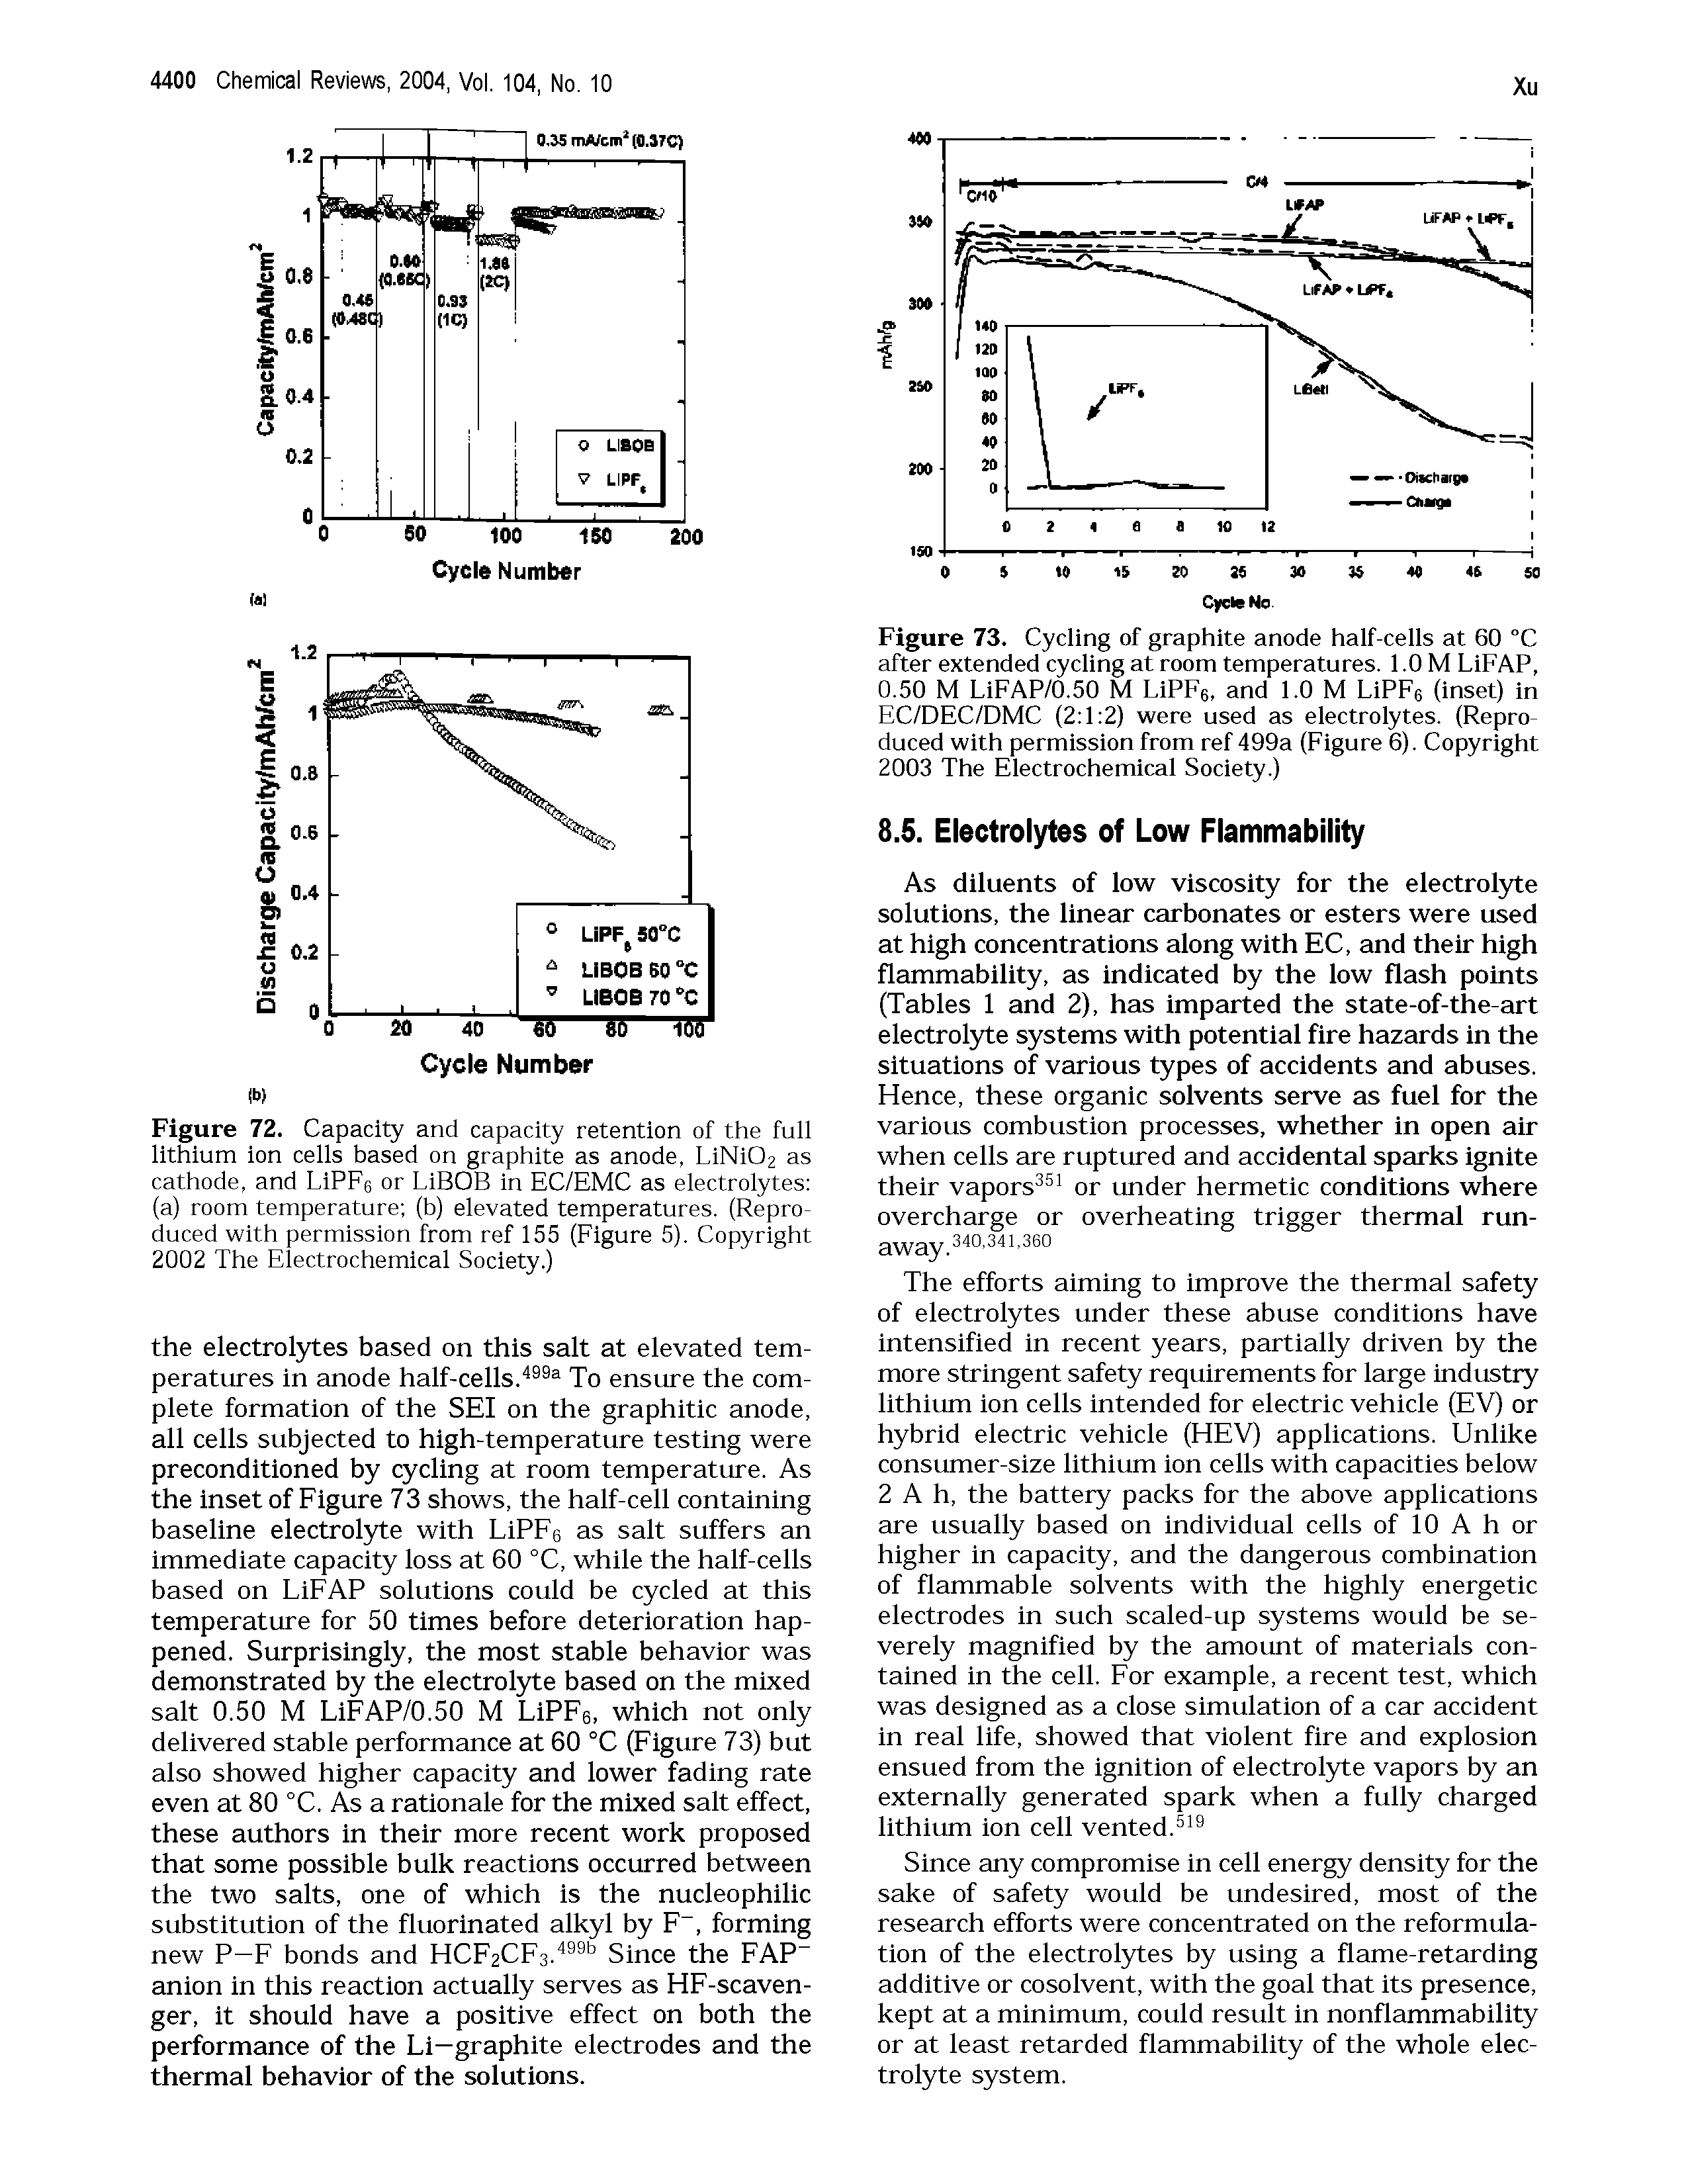 Figure 72. Capacity and capacity retention of the fuii lithium ion cells based on graphite as anode, LiNiOj as cathode, and LiPFe or LiBOB in EC/EMC as electrolytes (a) room temperature (b) elevated temperatures. (Reproduced with permission from ref 155 (Figure 5). Copyright 2002 The Electrochemical Society.)...